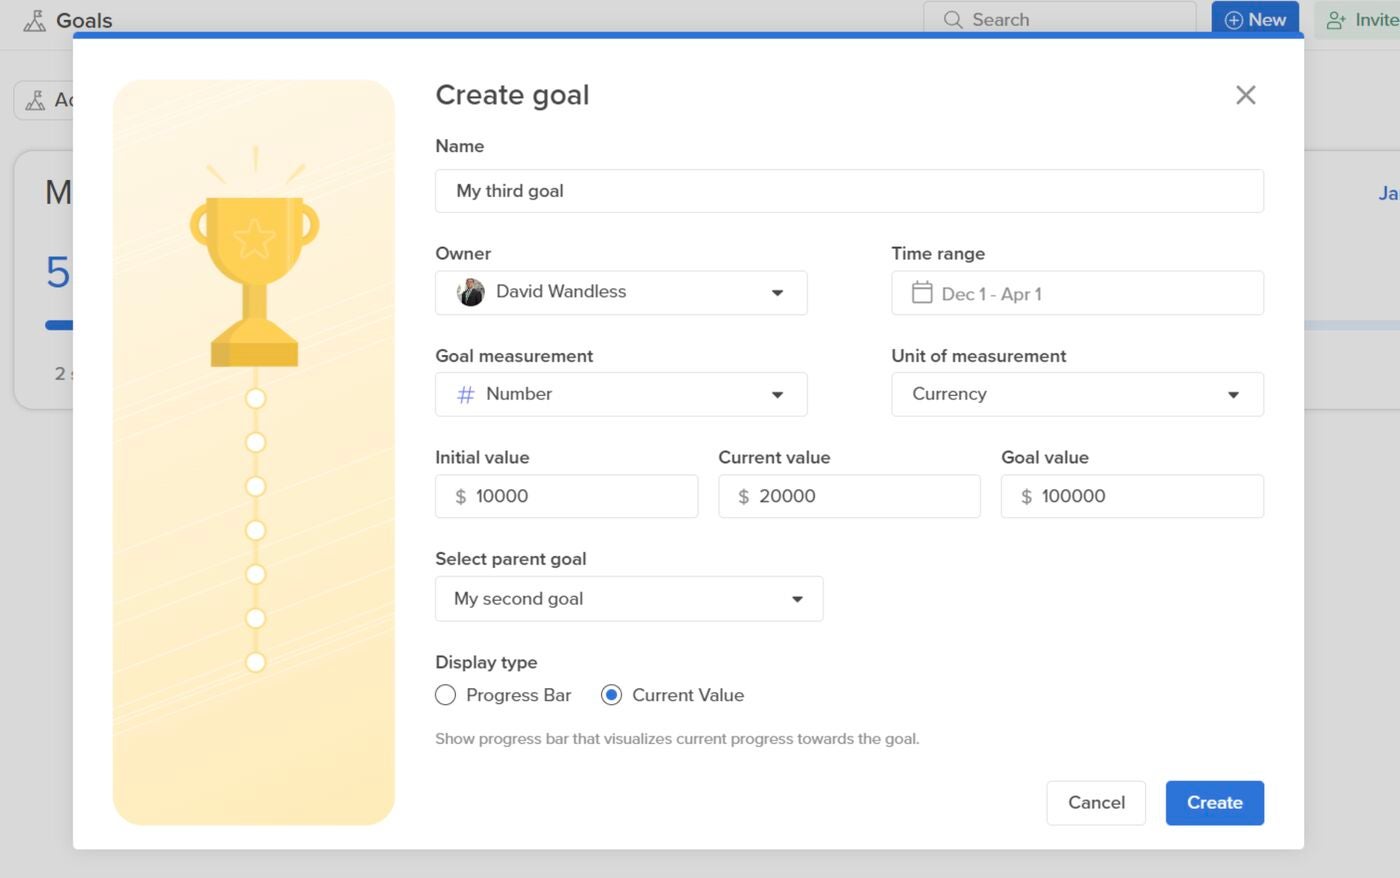 An example of how to create a goal in Hive.